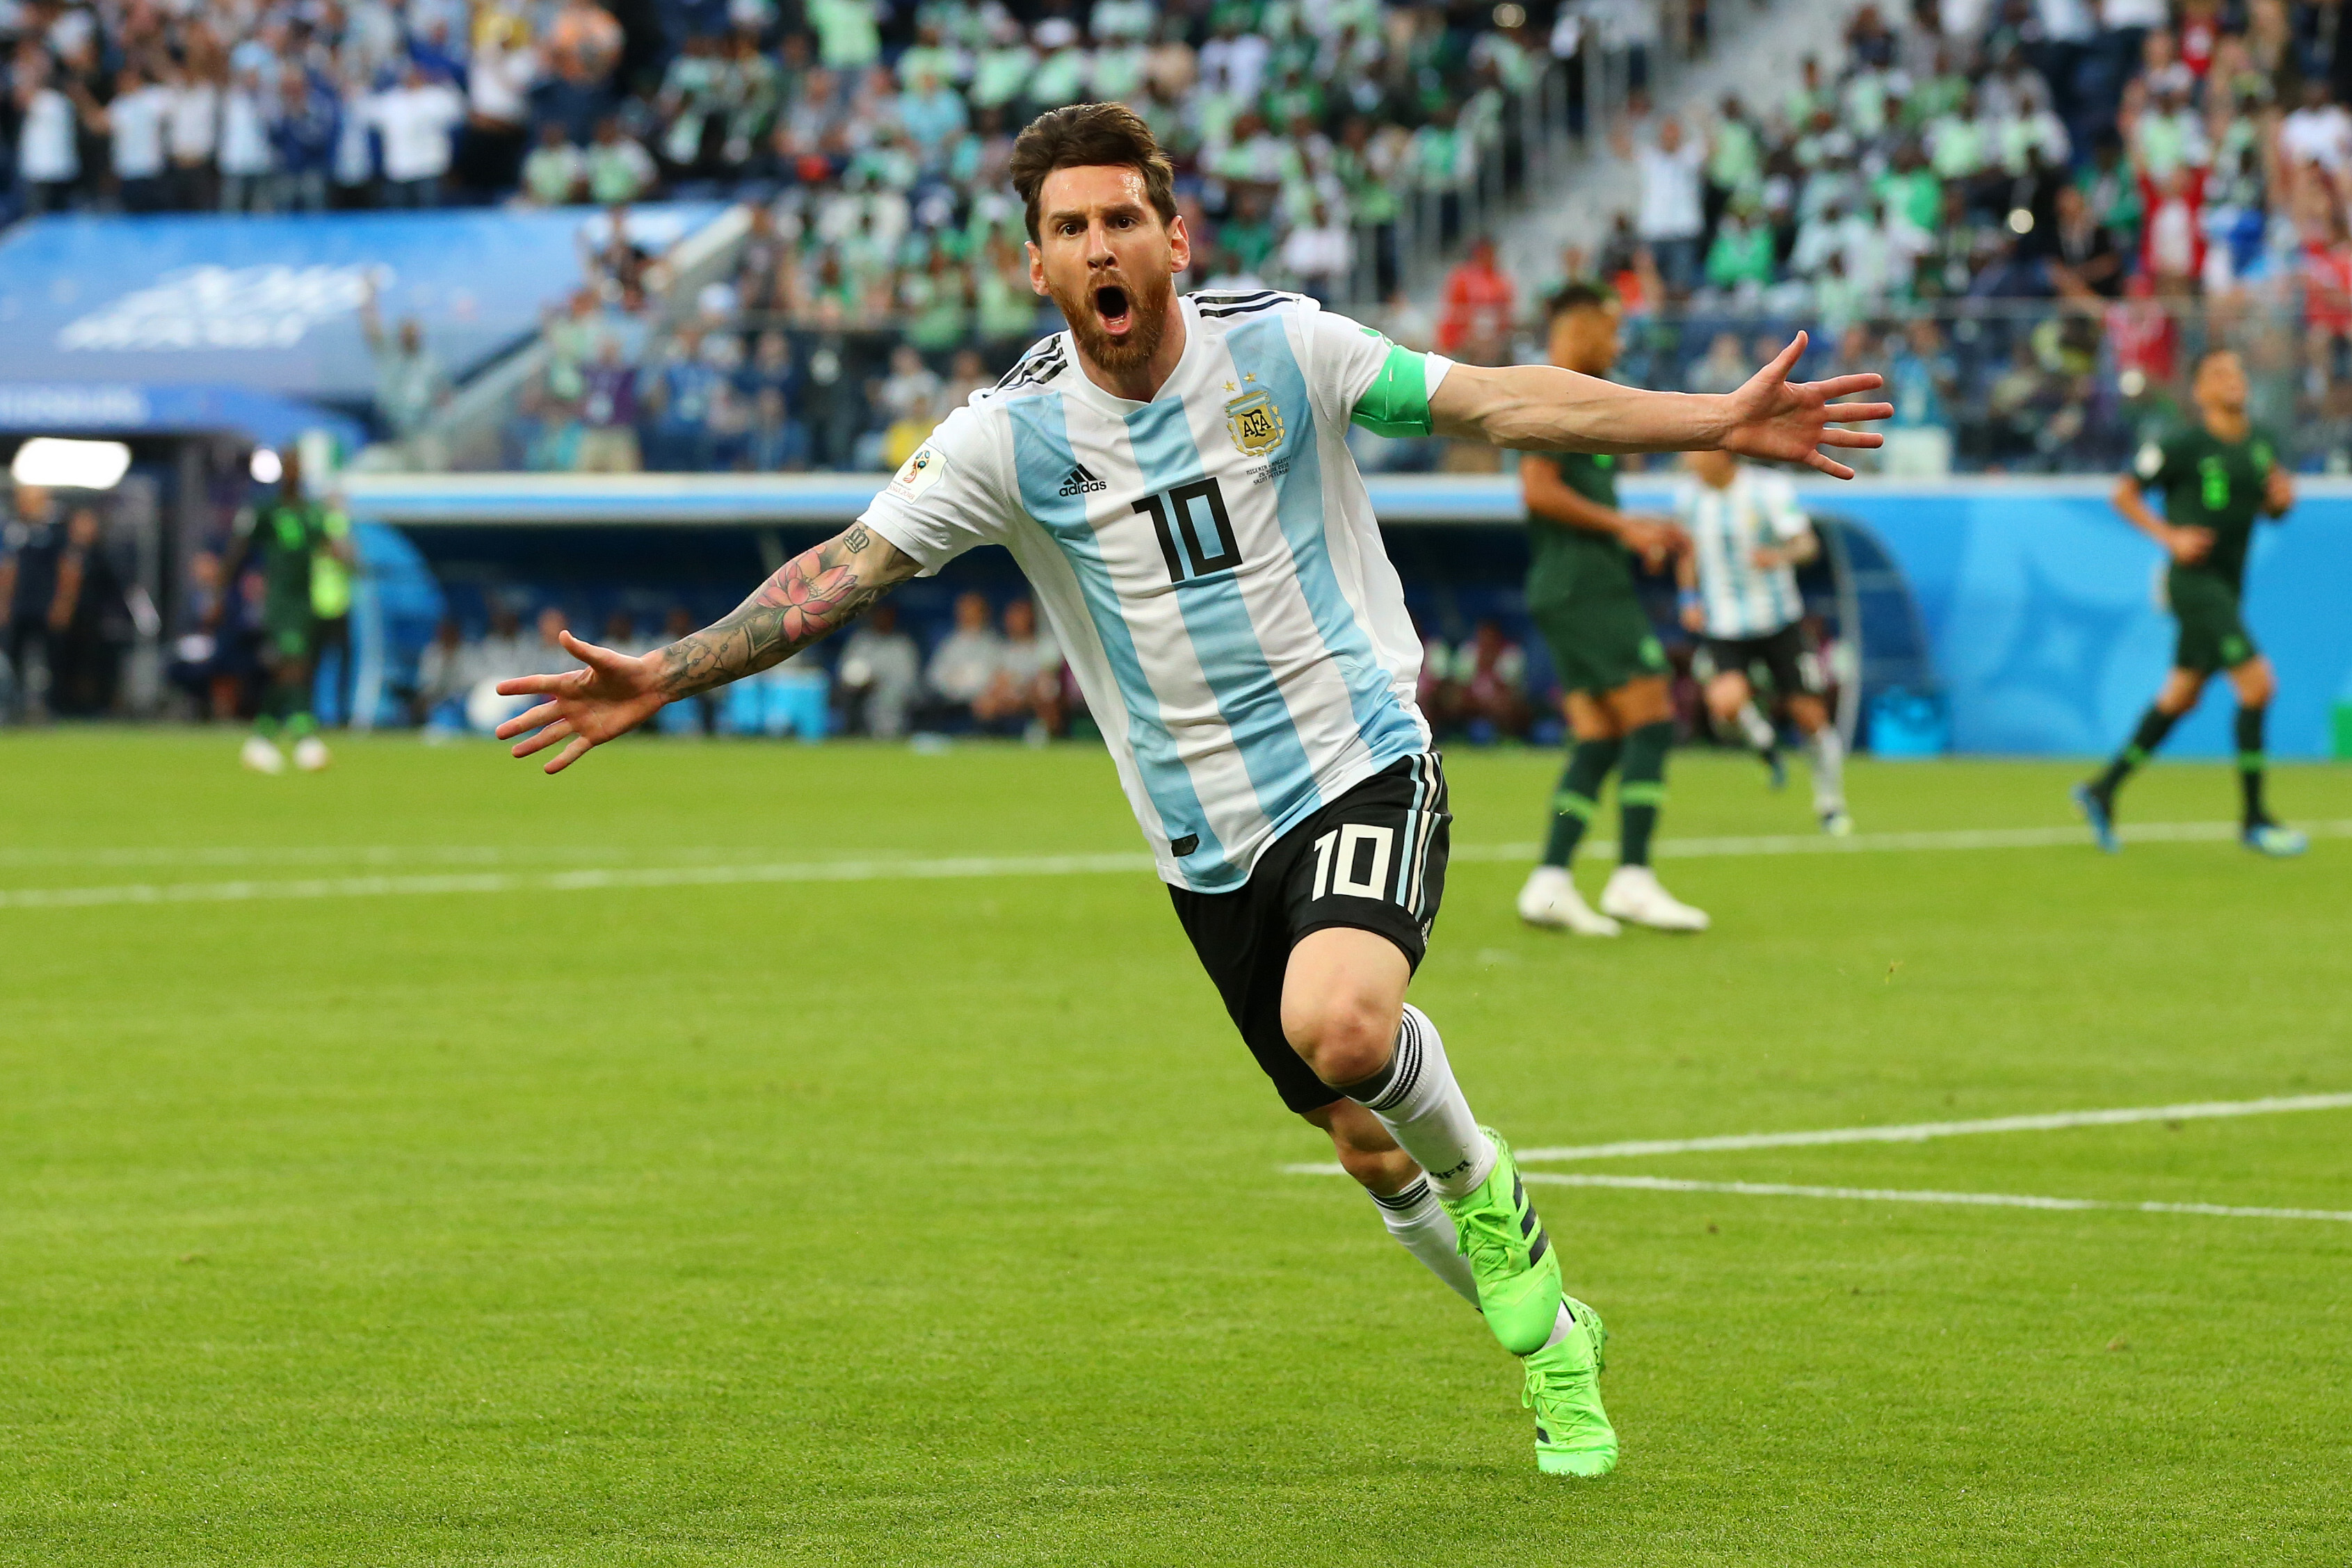 Lionel Messi in FIFA 2018 World Cup Wallpaper, HD Sports 4K Wallpapers